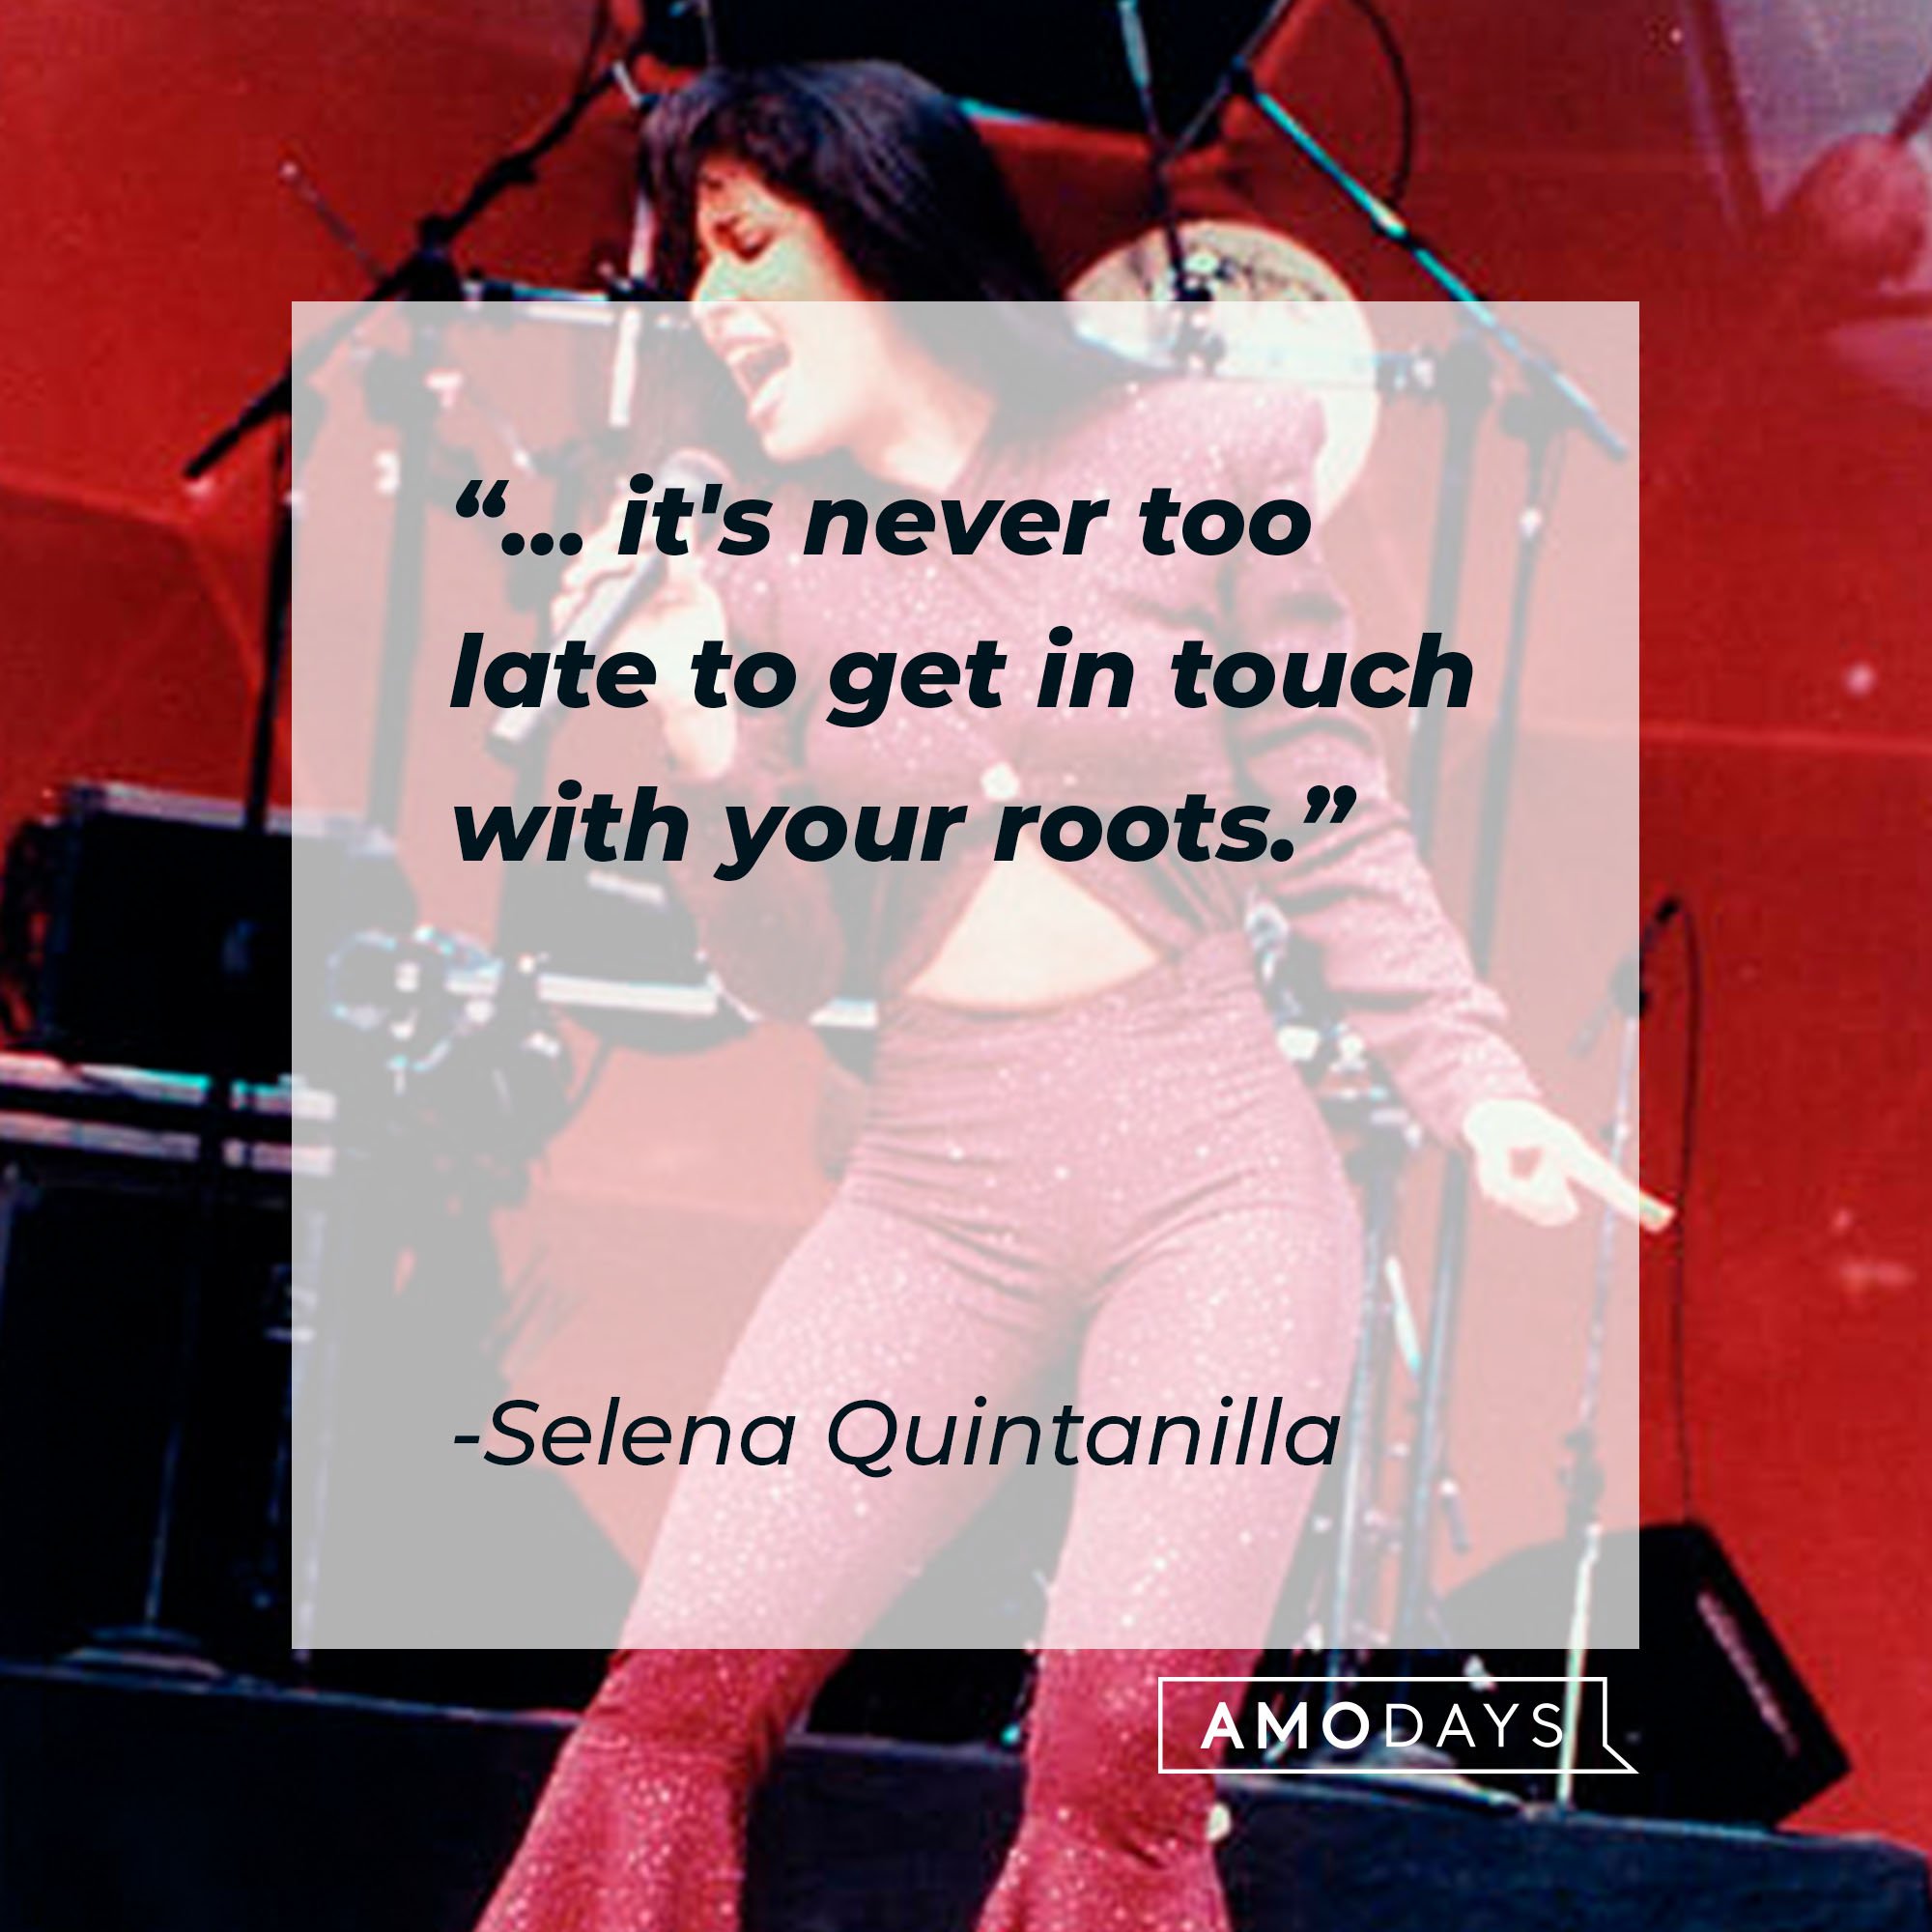 Selena Quintanilla's quote: "… it's never too late to get in touch with your roots." | Image: AmoDays